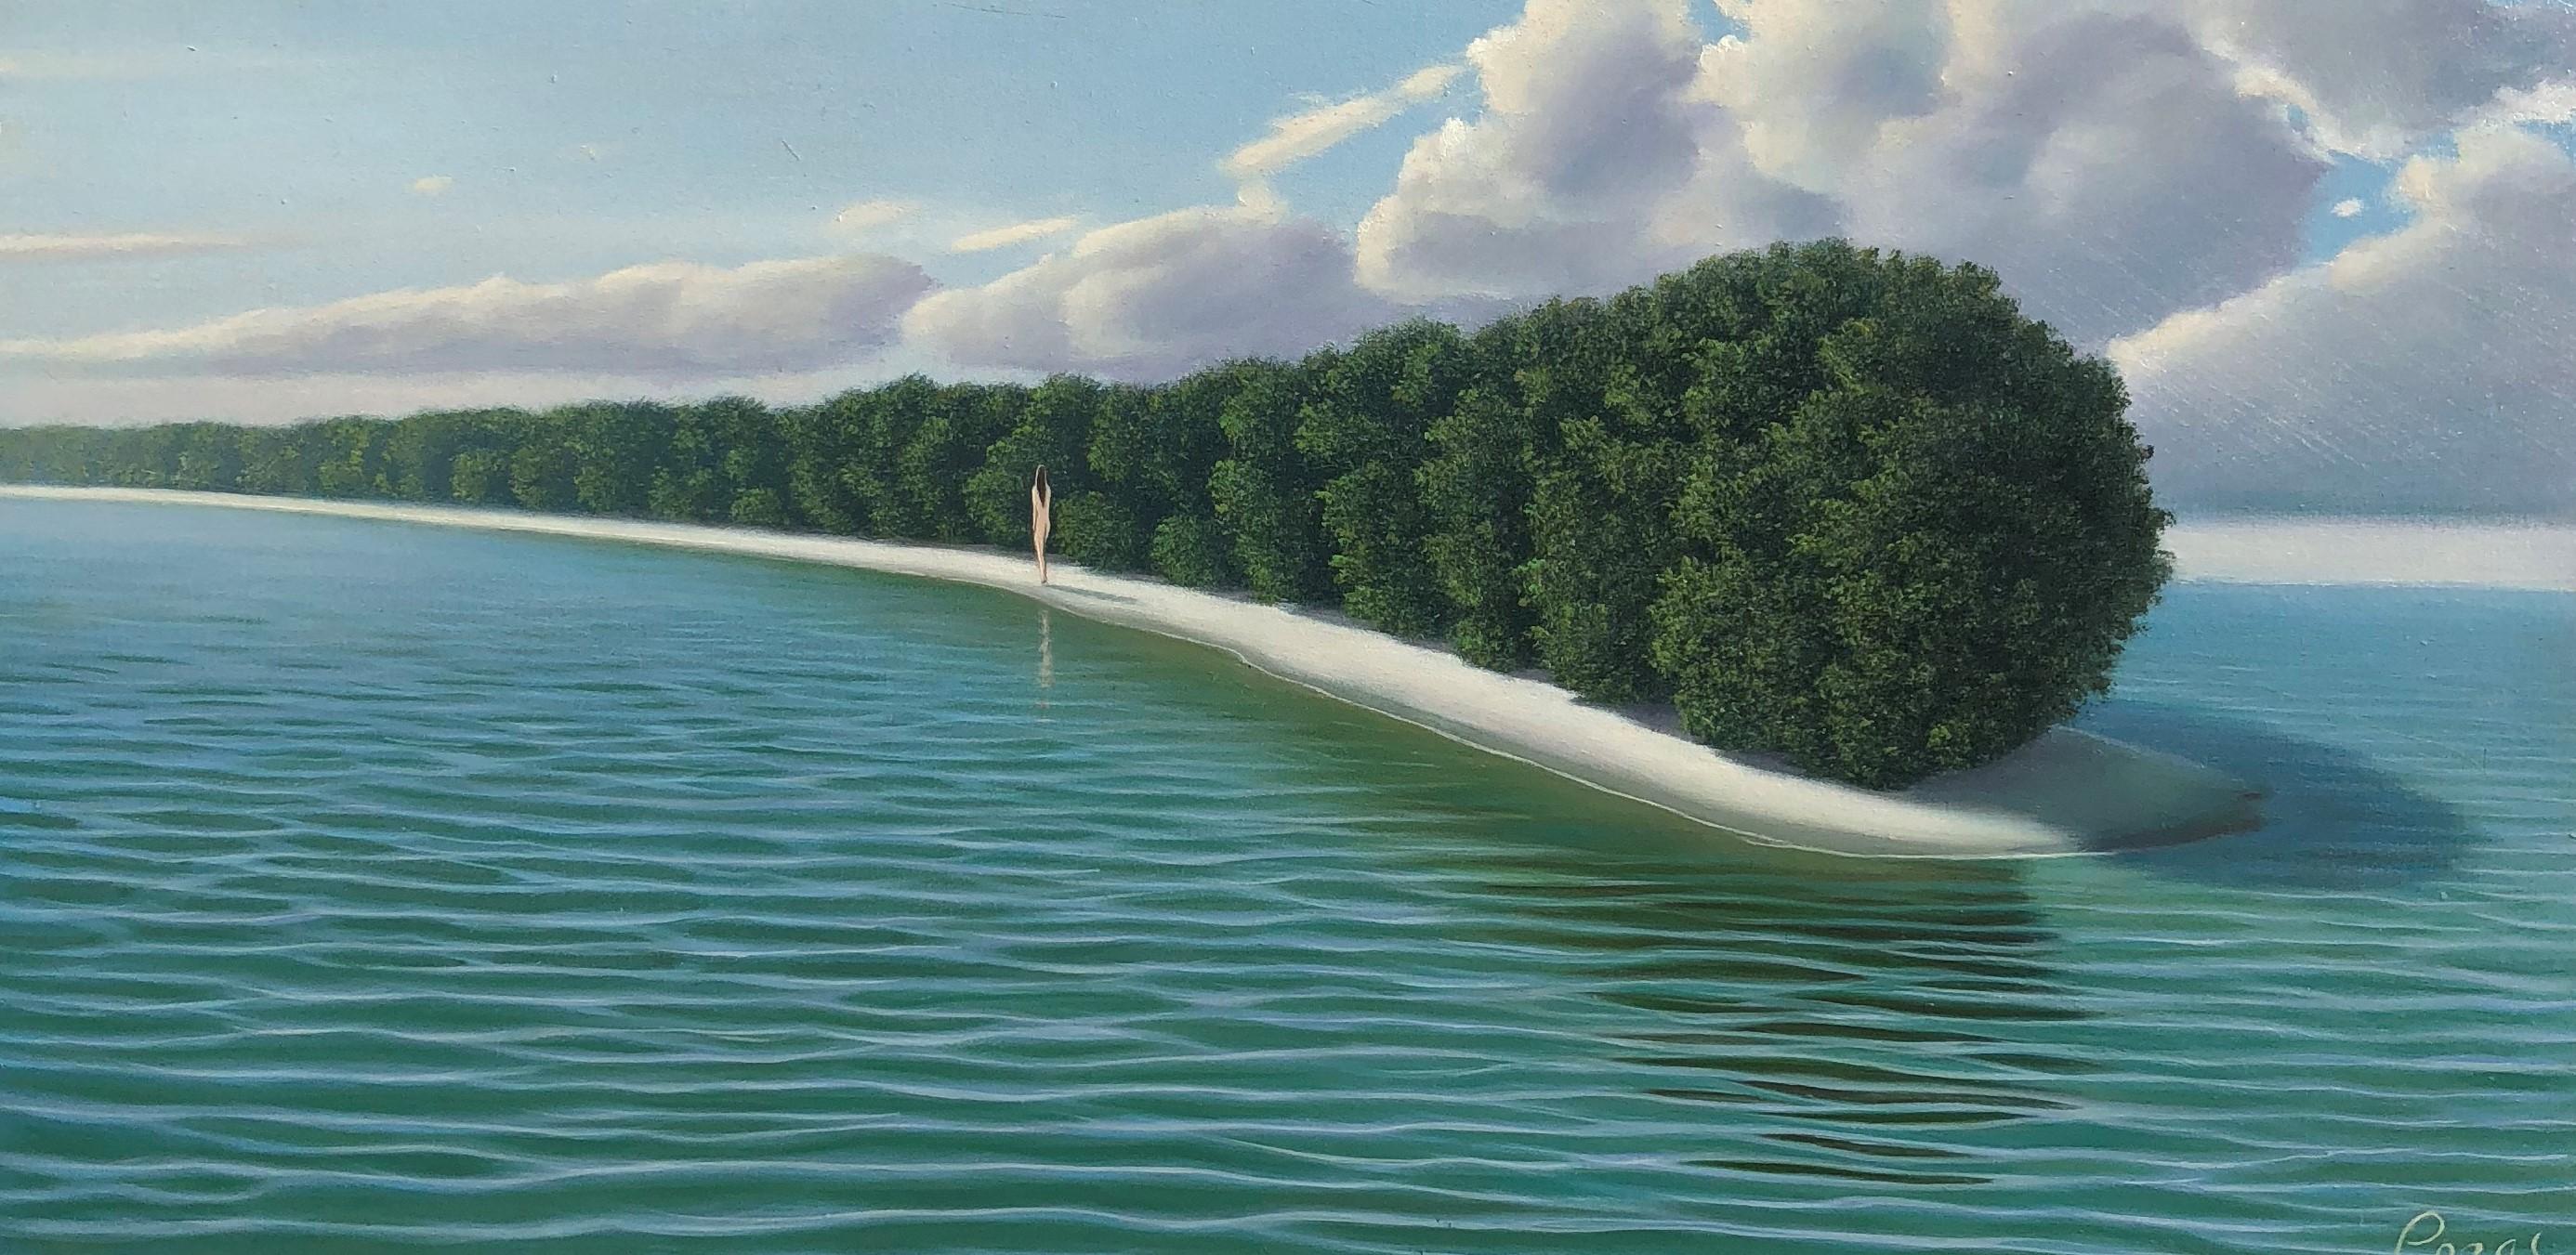 René Monzón Relova “Pozas” Landscape Painting - My Isla - Highly Detailed Surreal Island Landscape with Blue Turquoise Water